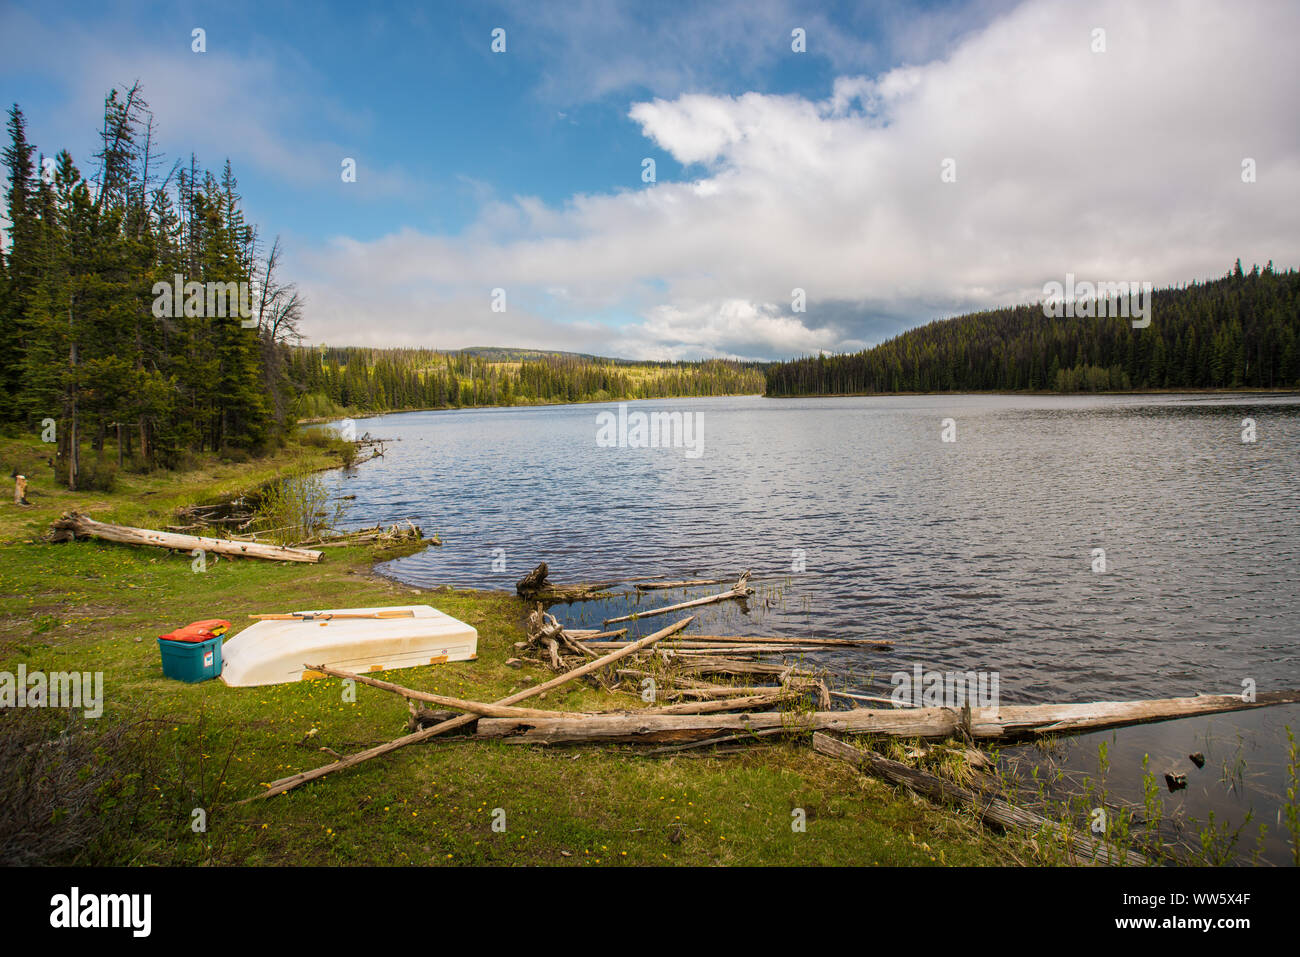 Lake in Nowhere with small rowing boat on the shore, British Columbia, Canada Stock Photo